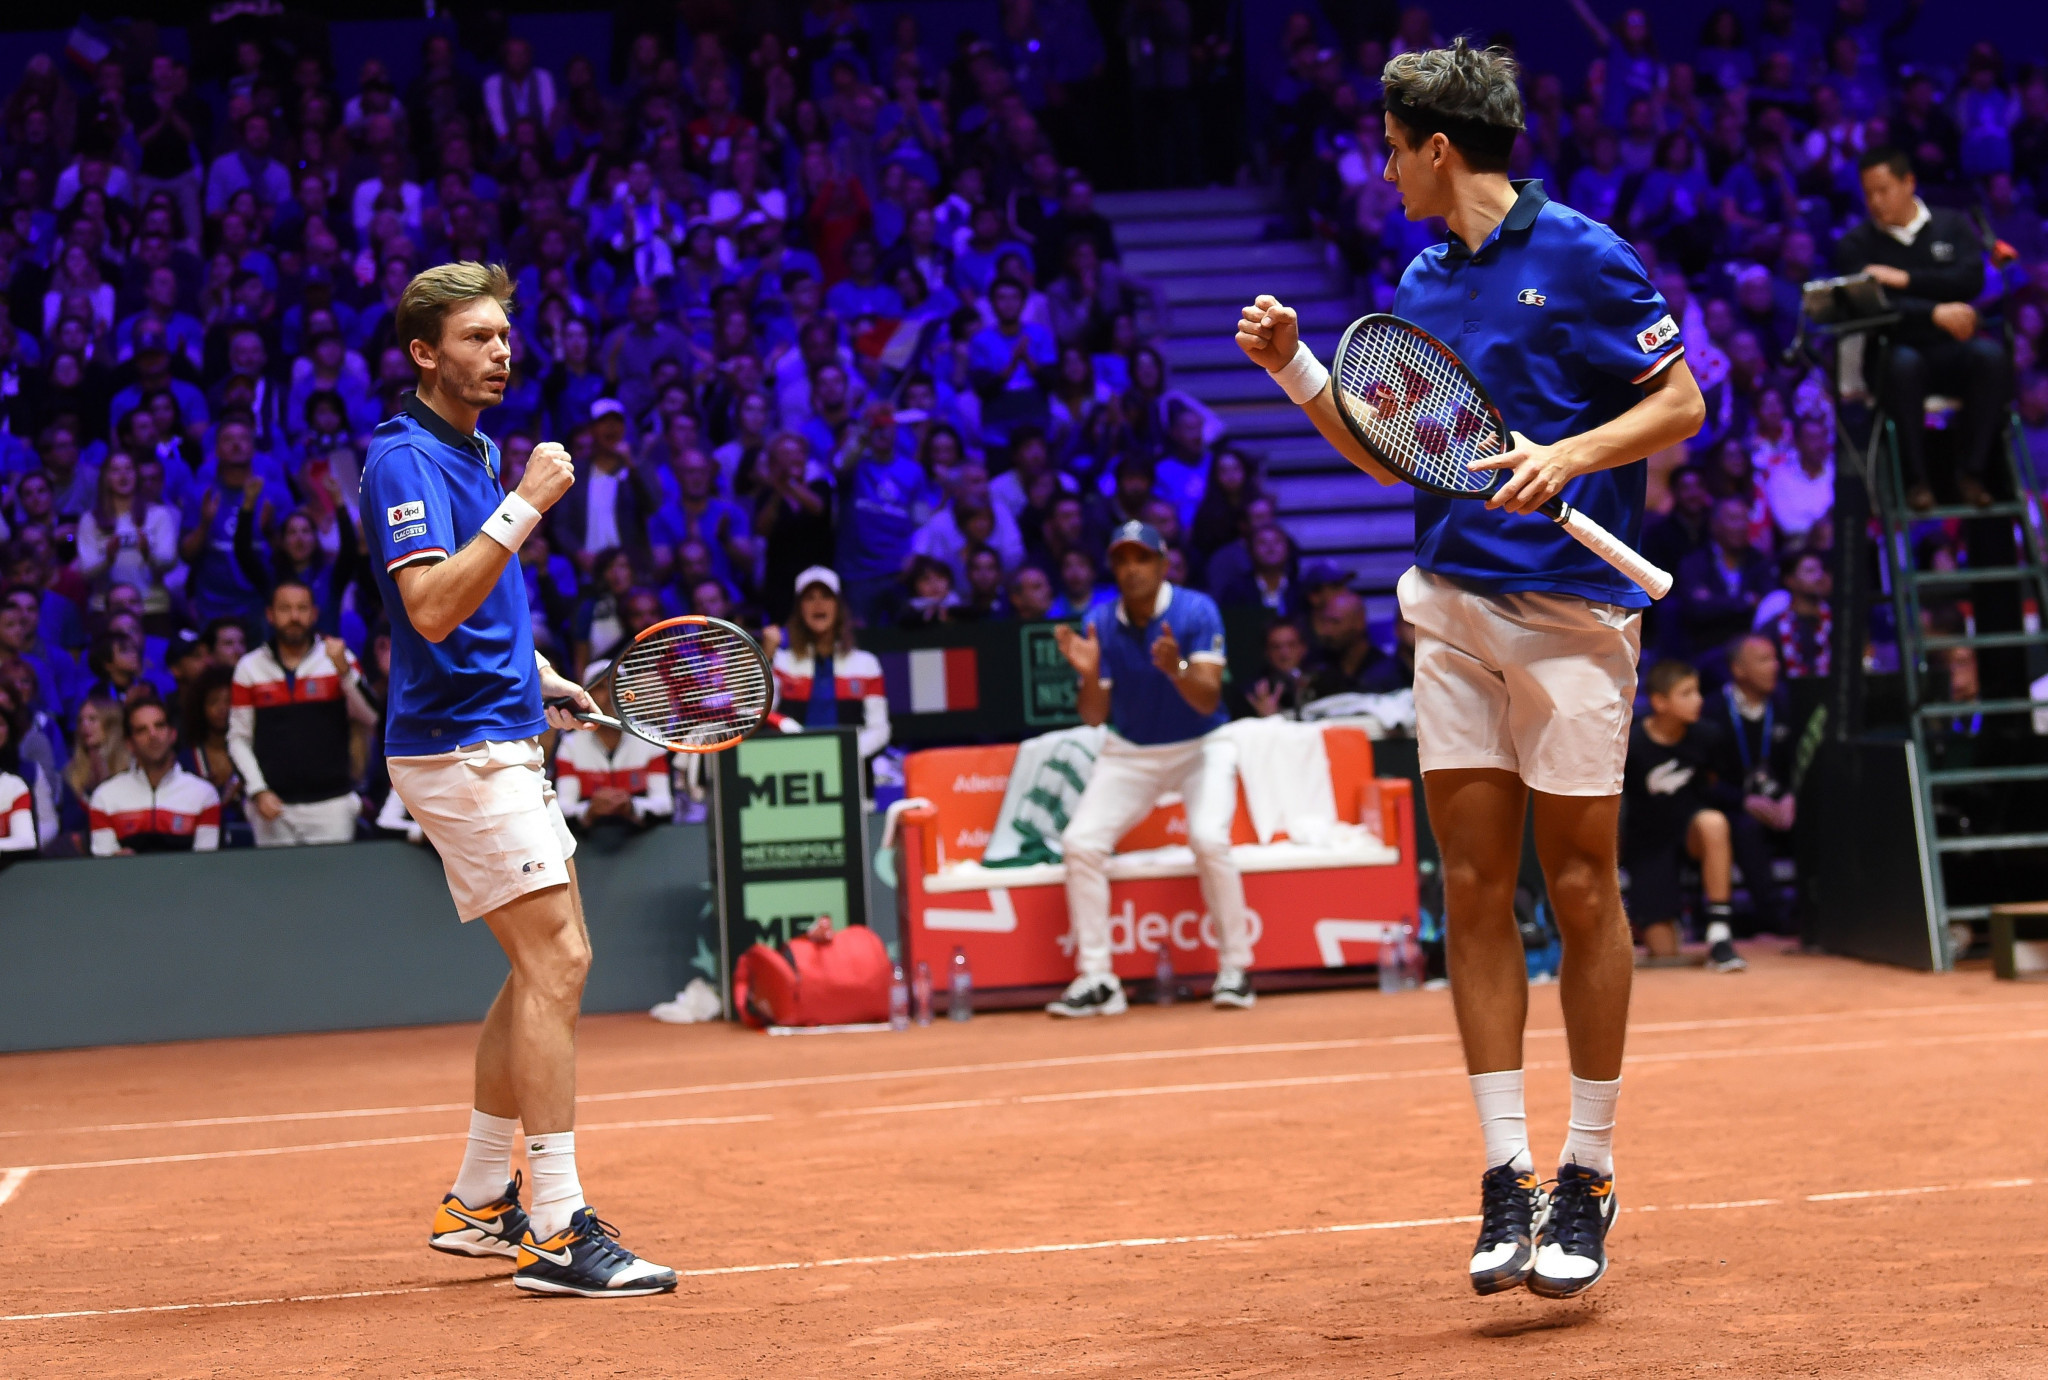 France's Nicolas Mahut and Pierre-Hugues Herbert won the doubles fixture to force a third day of competition a the Davis Cup in Lille ©Getty Images